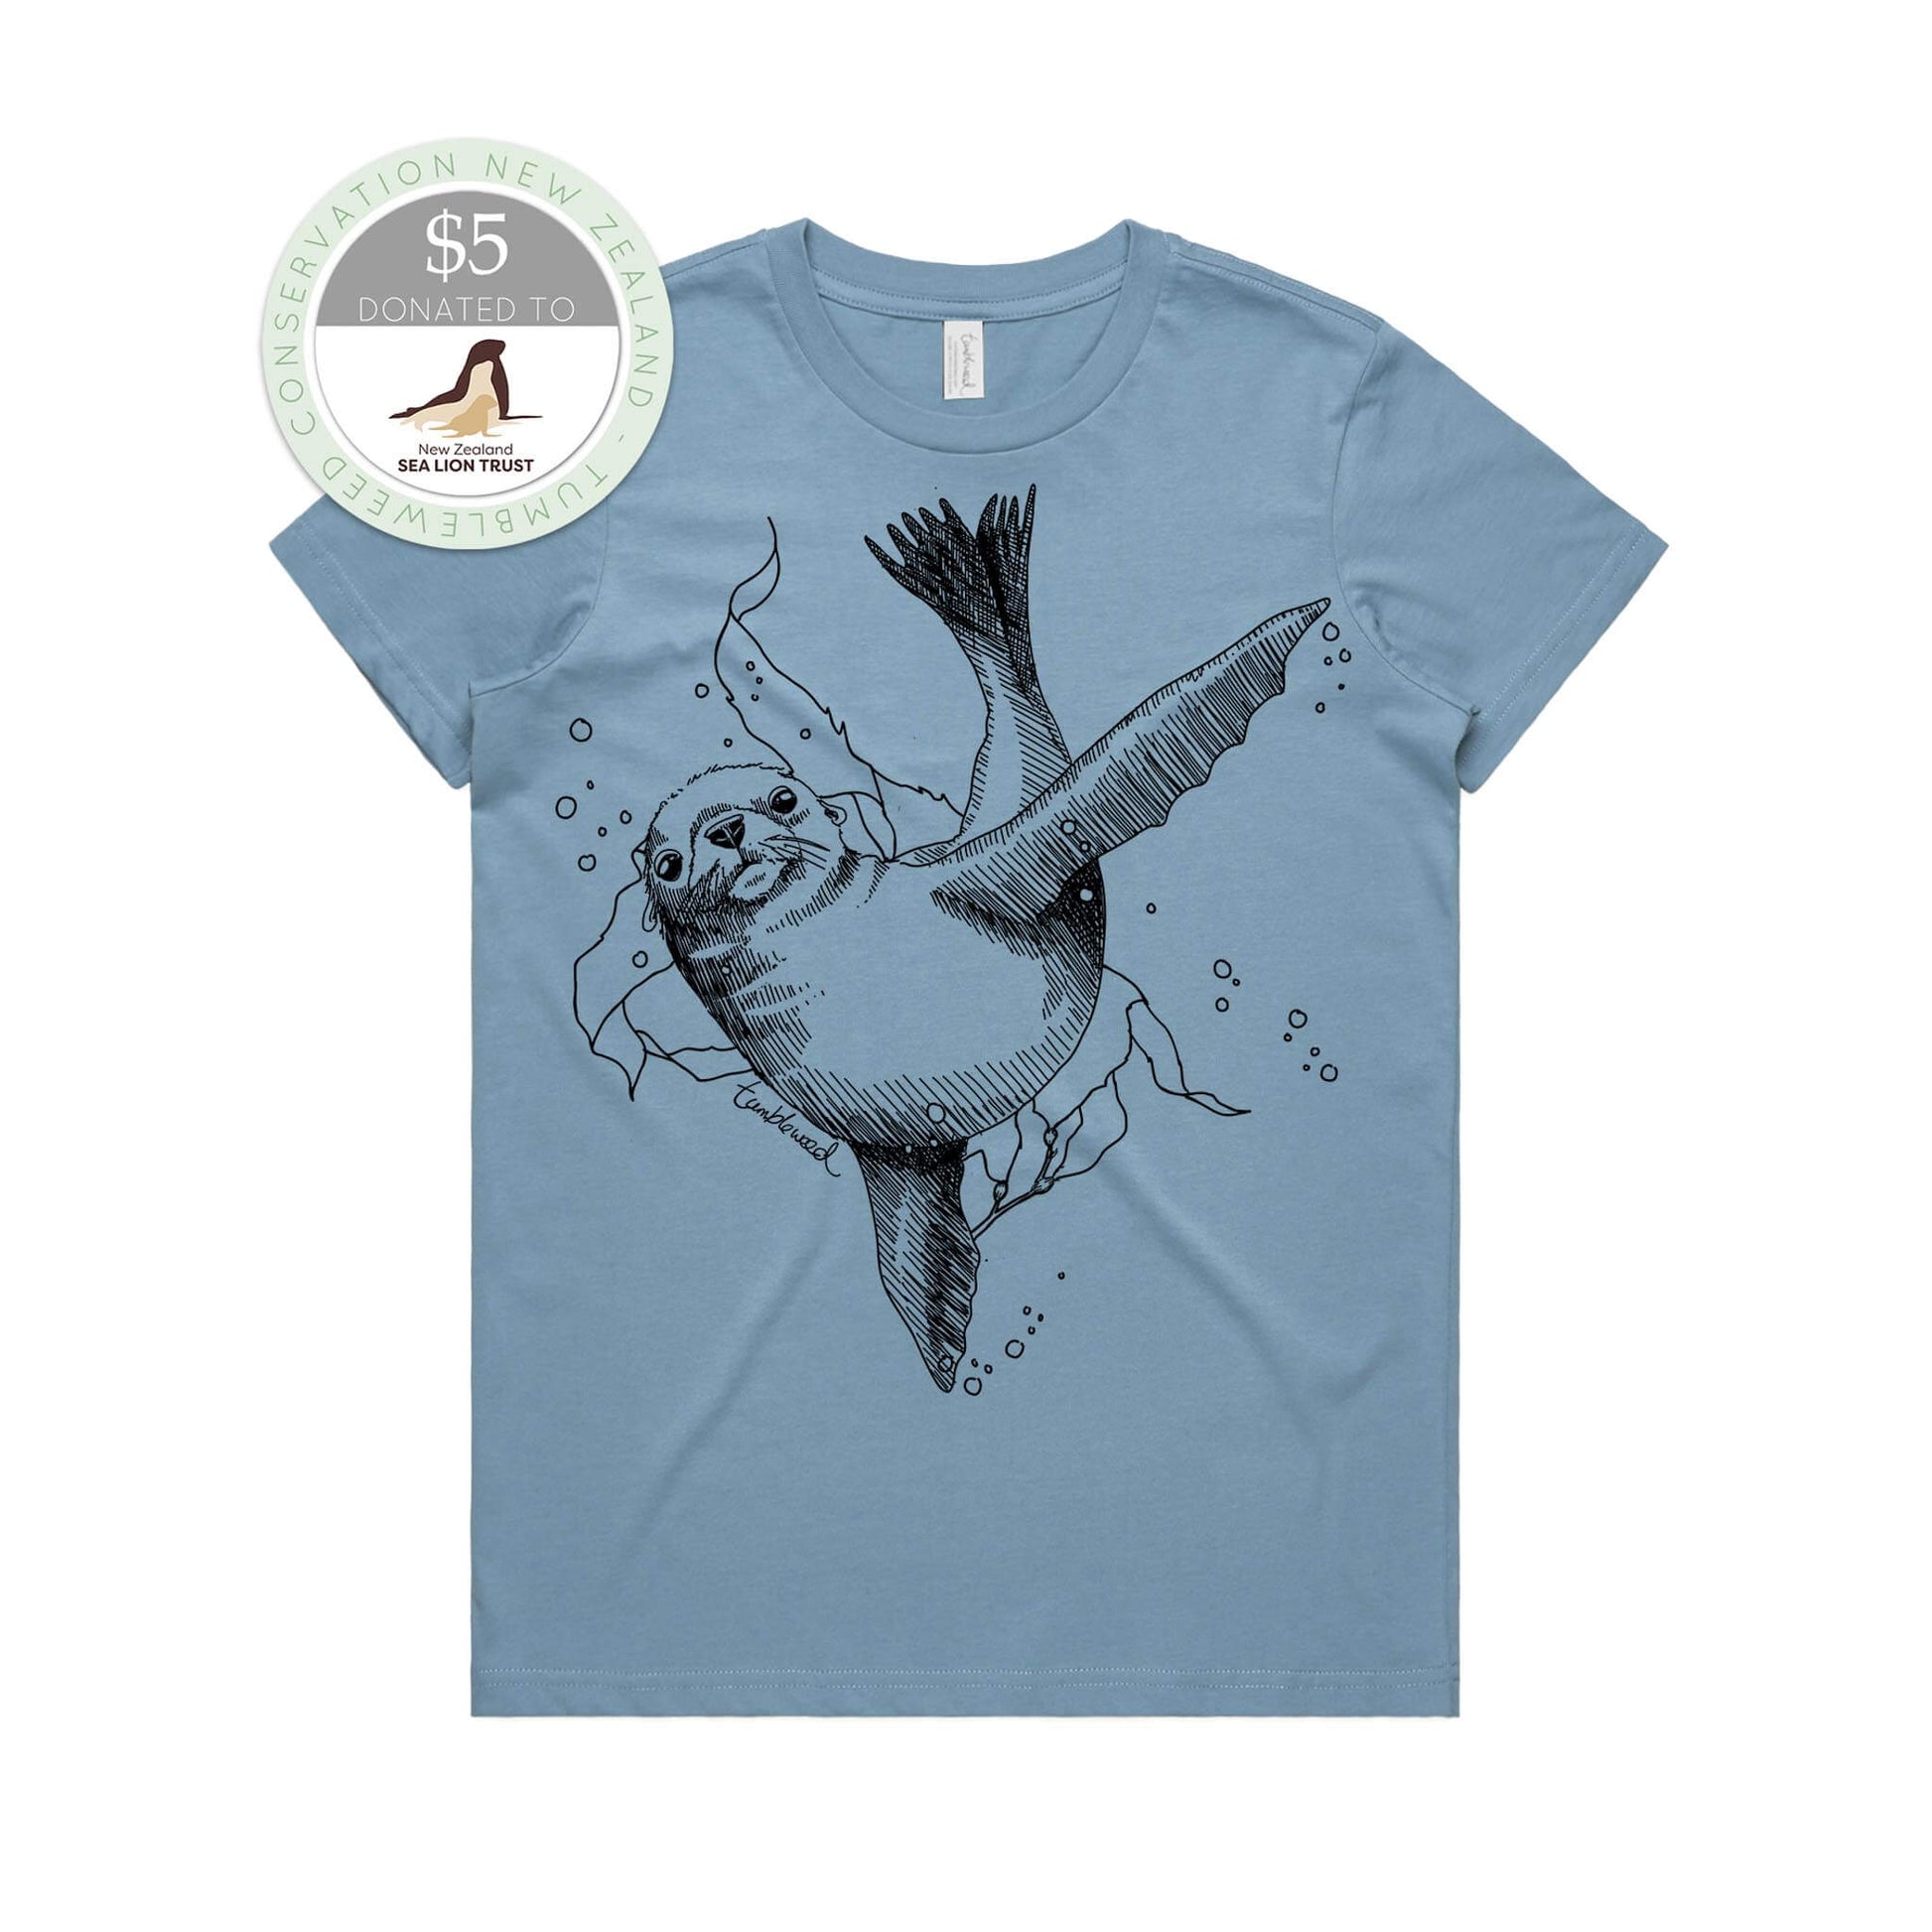 Charcoal, female t-shirt featuring a screen printed New Zealand sea lion design.